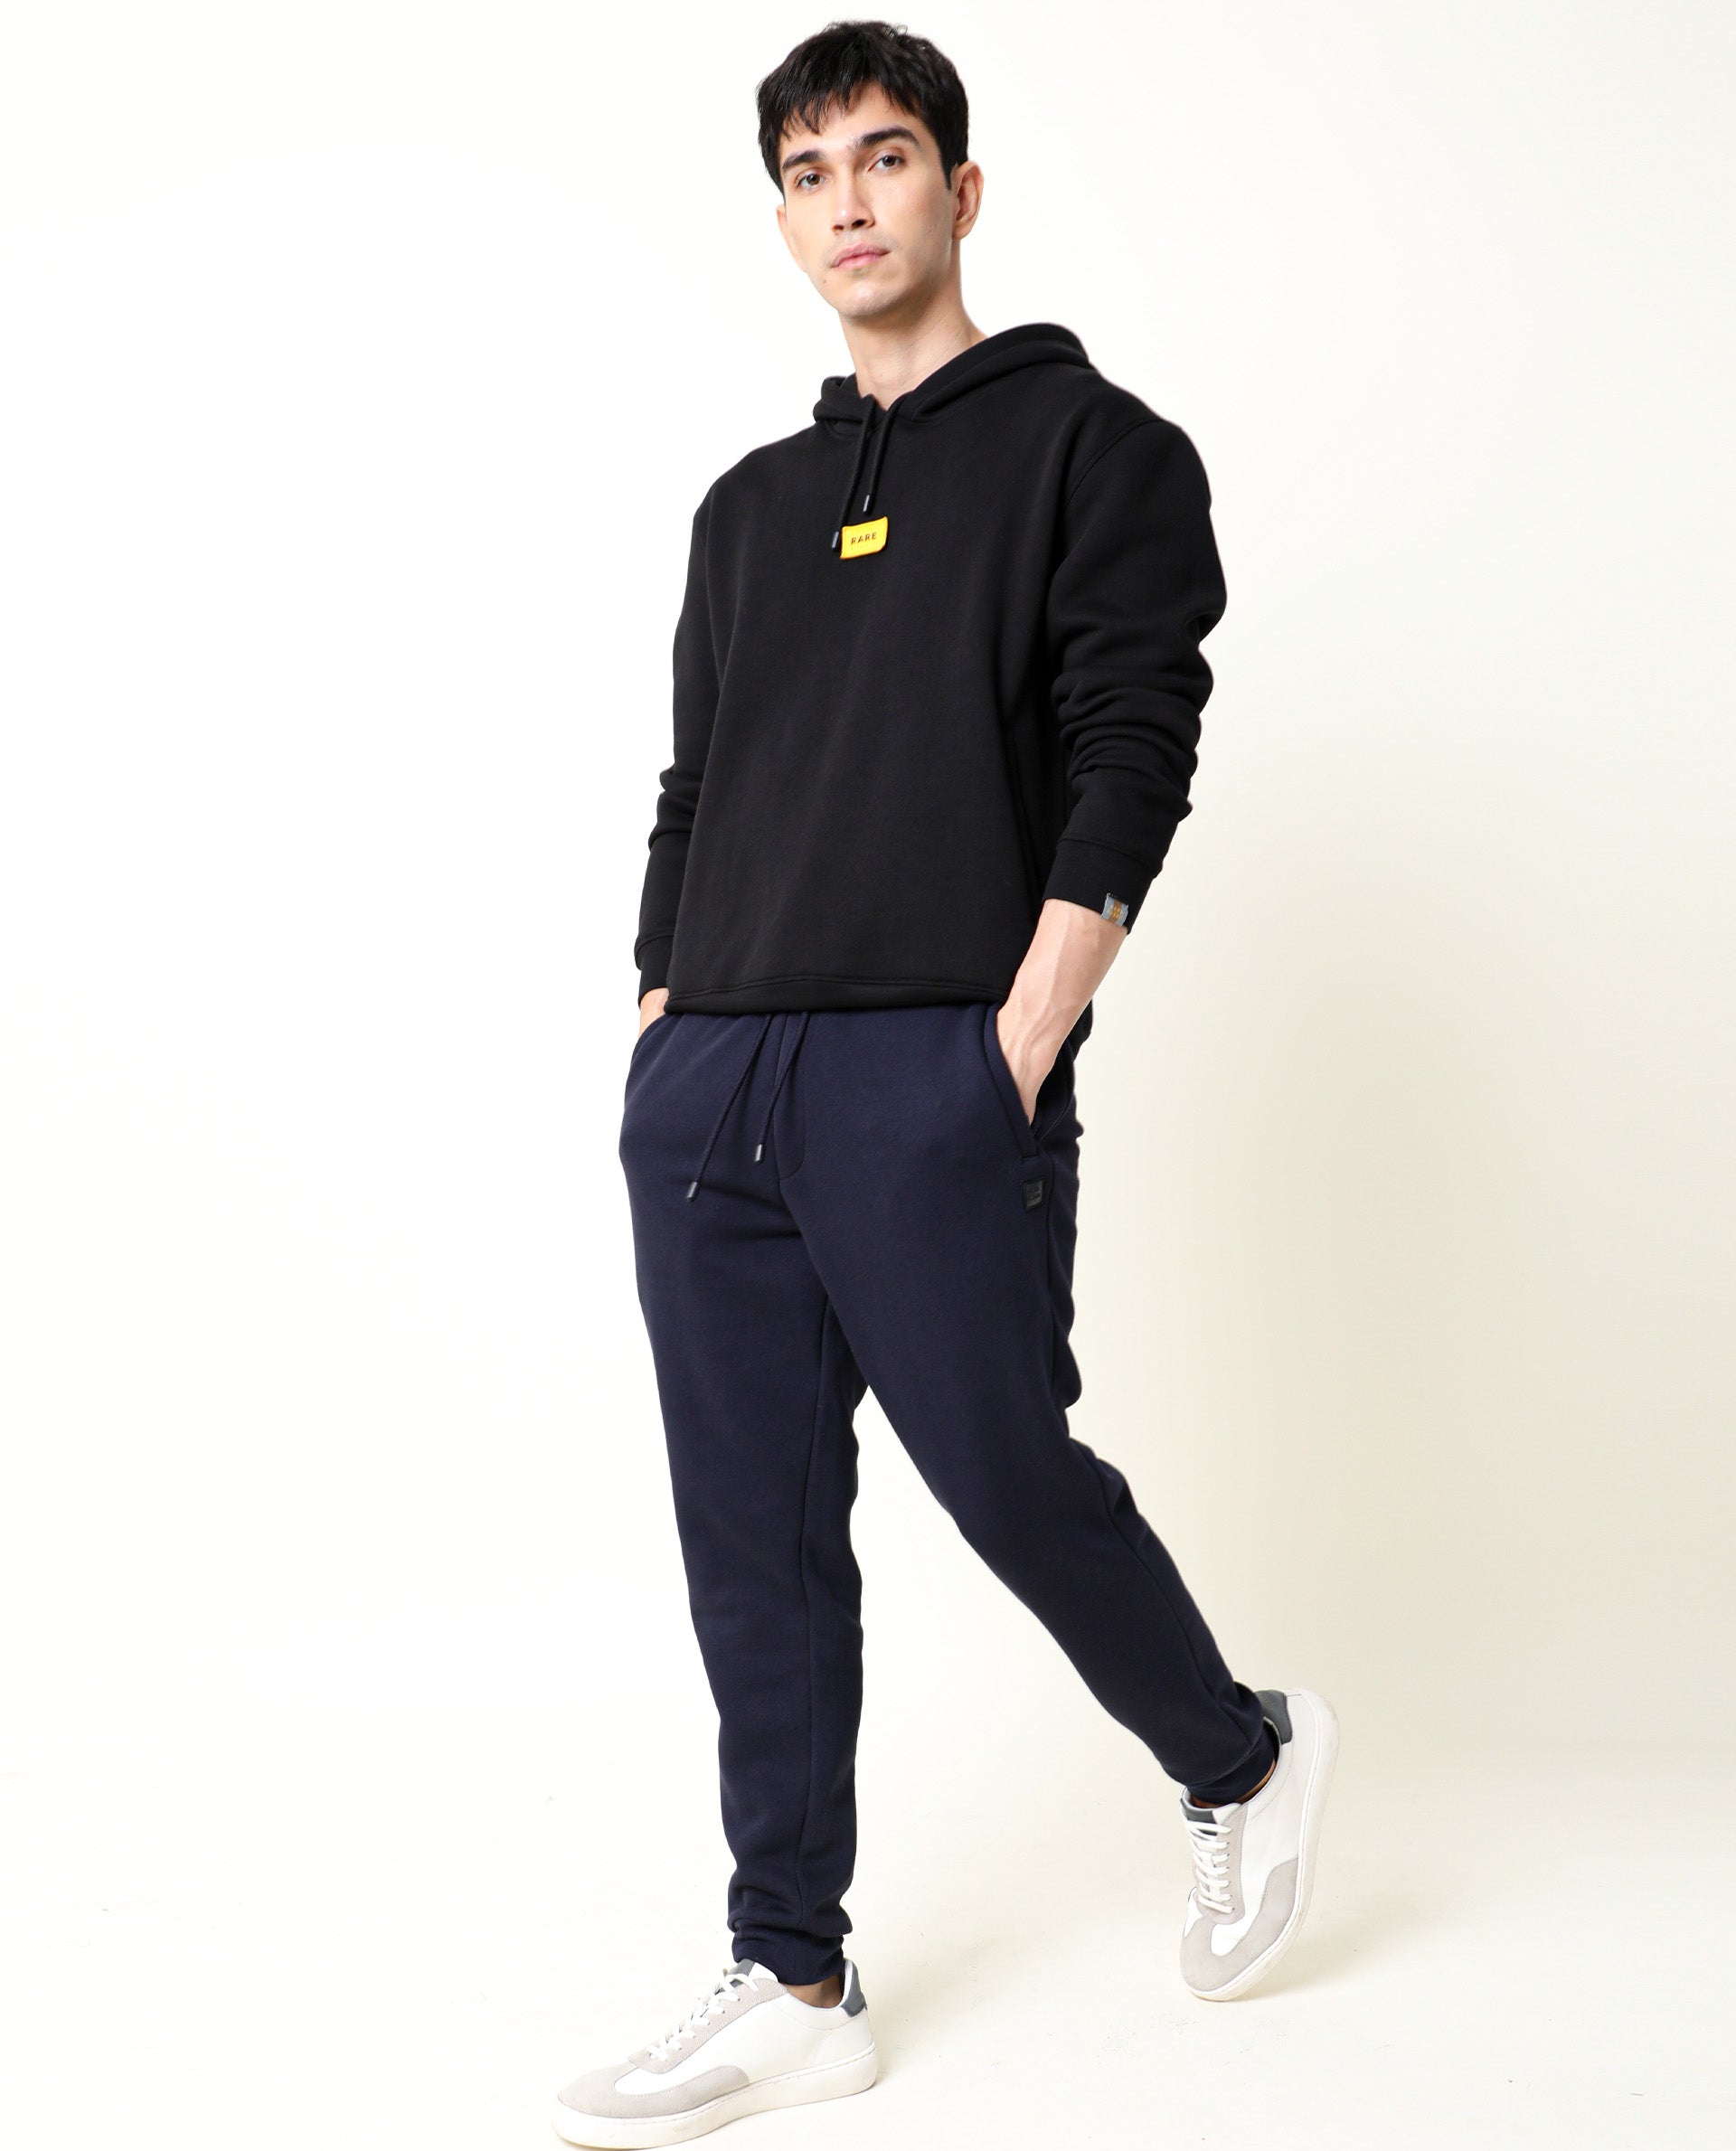 A Style Guide  How To Wear Stylish Track Pants For Men  Bewakoof Blog